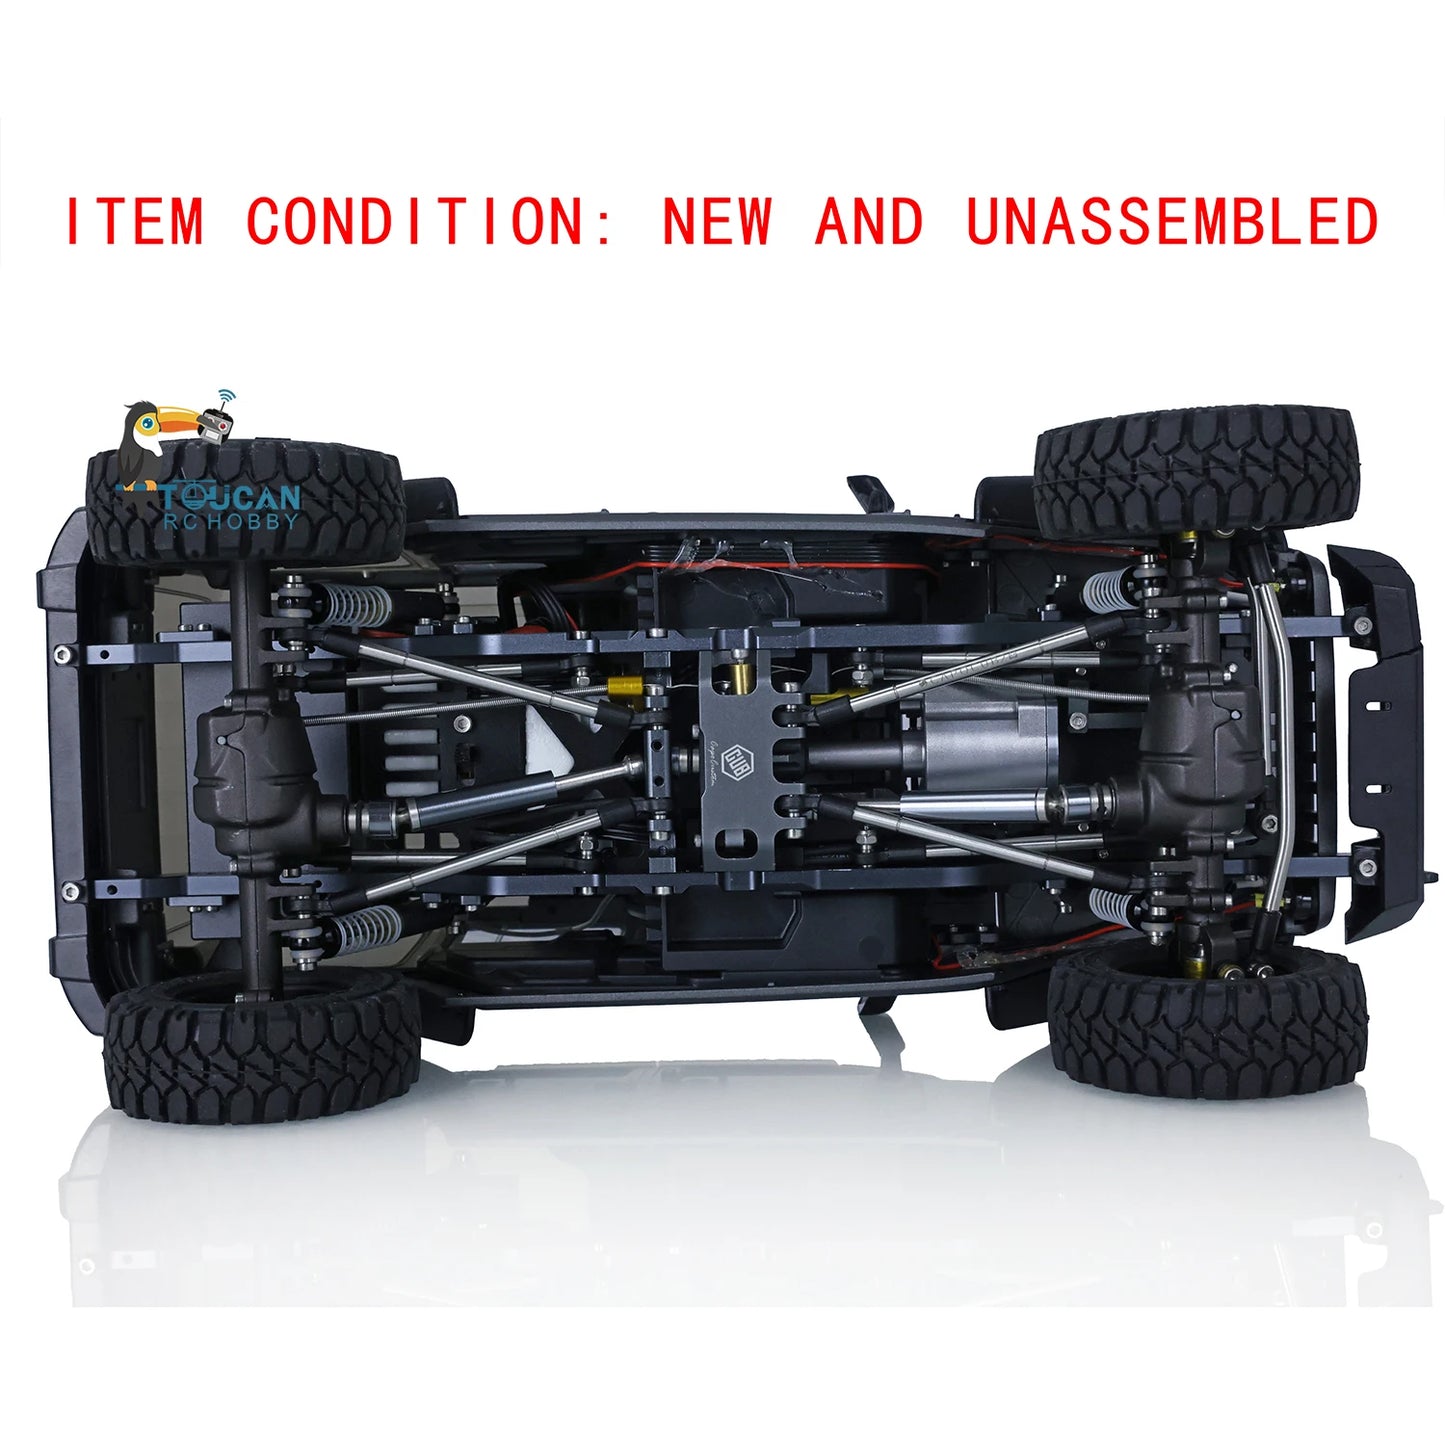 CAPO CUB2 JK KIT 1/18 Metal Chassis Crawler RC Car Model 2Speed Gearbox Differential TH19843